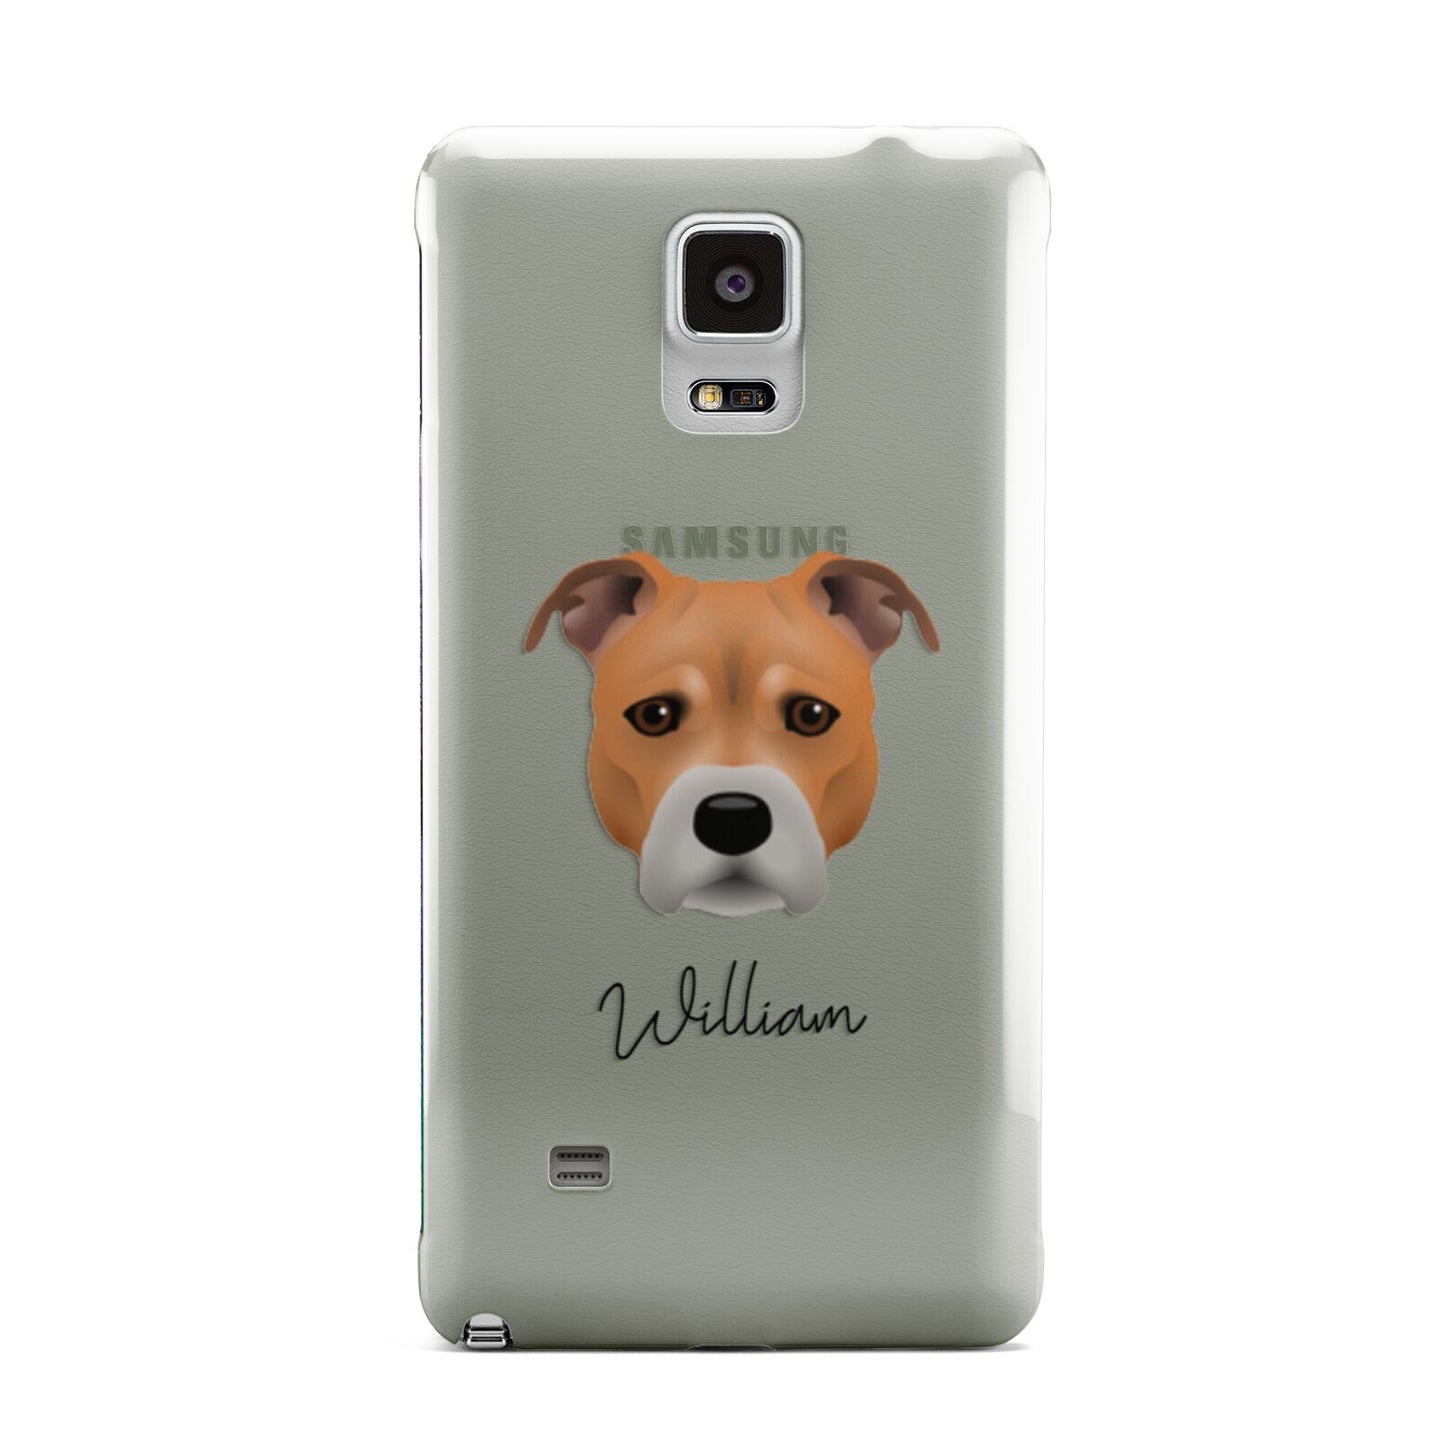 Staffordshire Bull Terrier Personalised Samsung Galaxy Note 4 Case